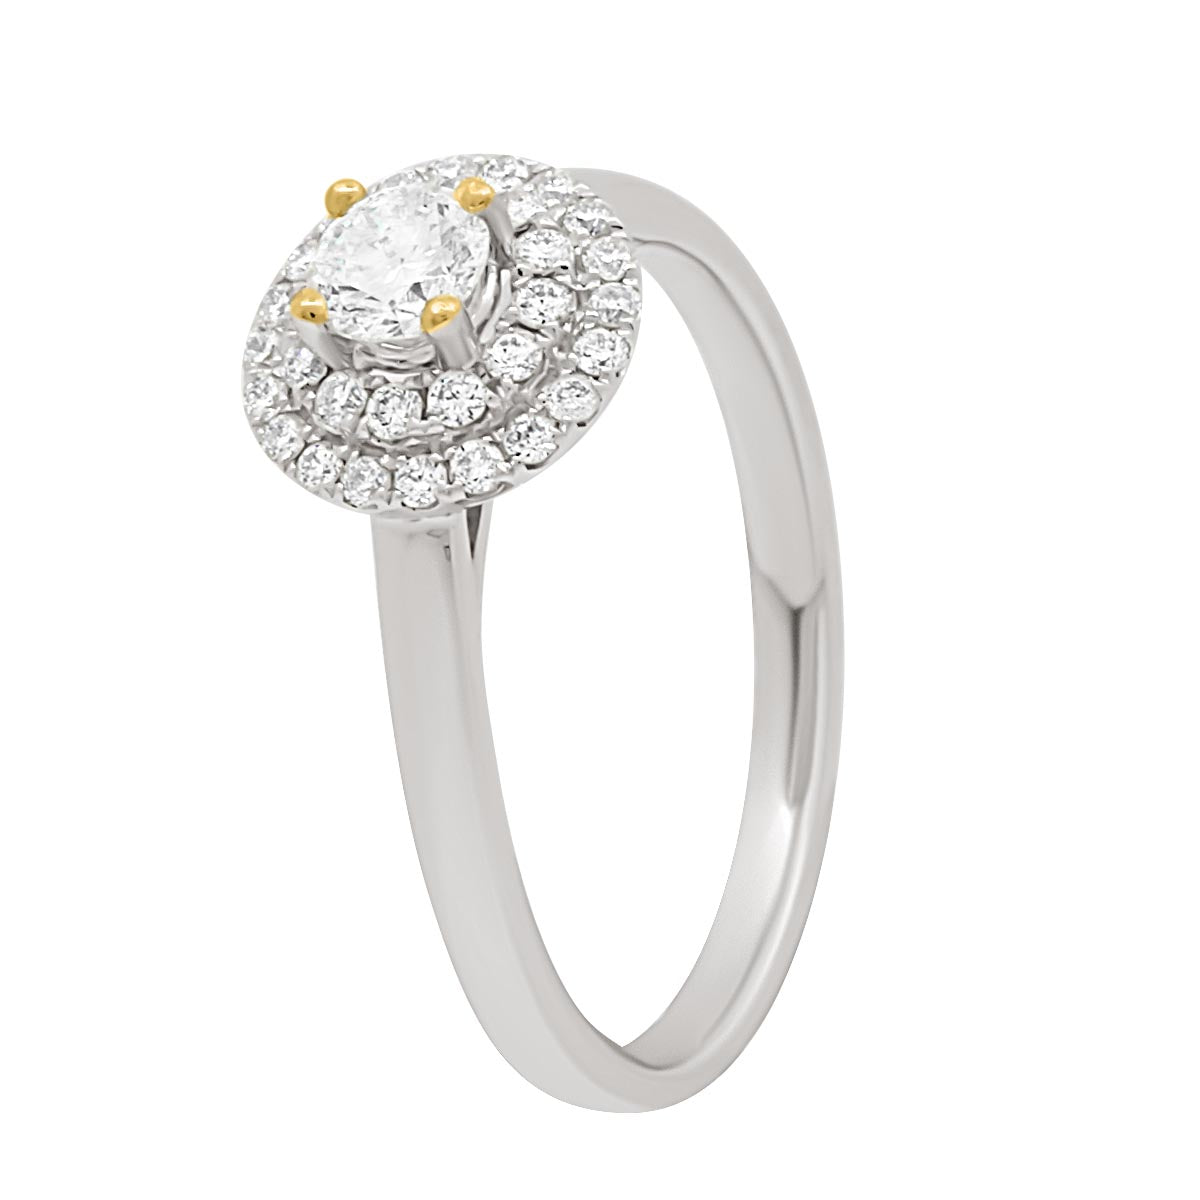 Ornate Diamond Ring WITH DOUBLE HALO SET IN WHITE GOLD UPRIGHT FROM AND ANGLE